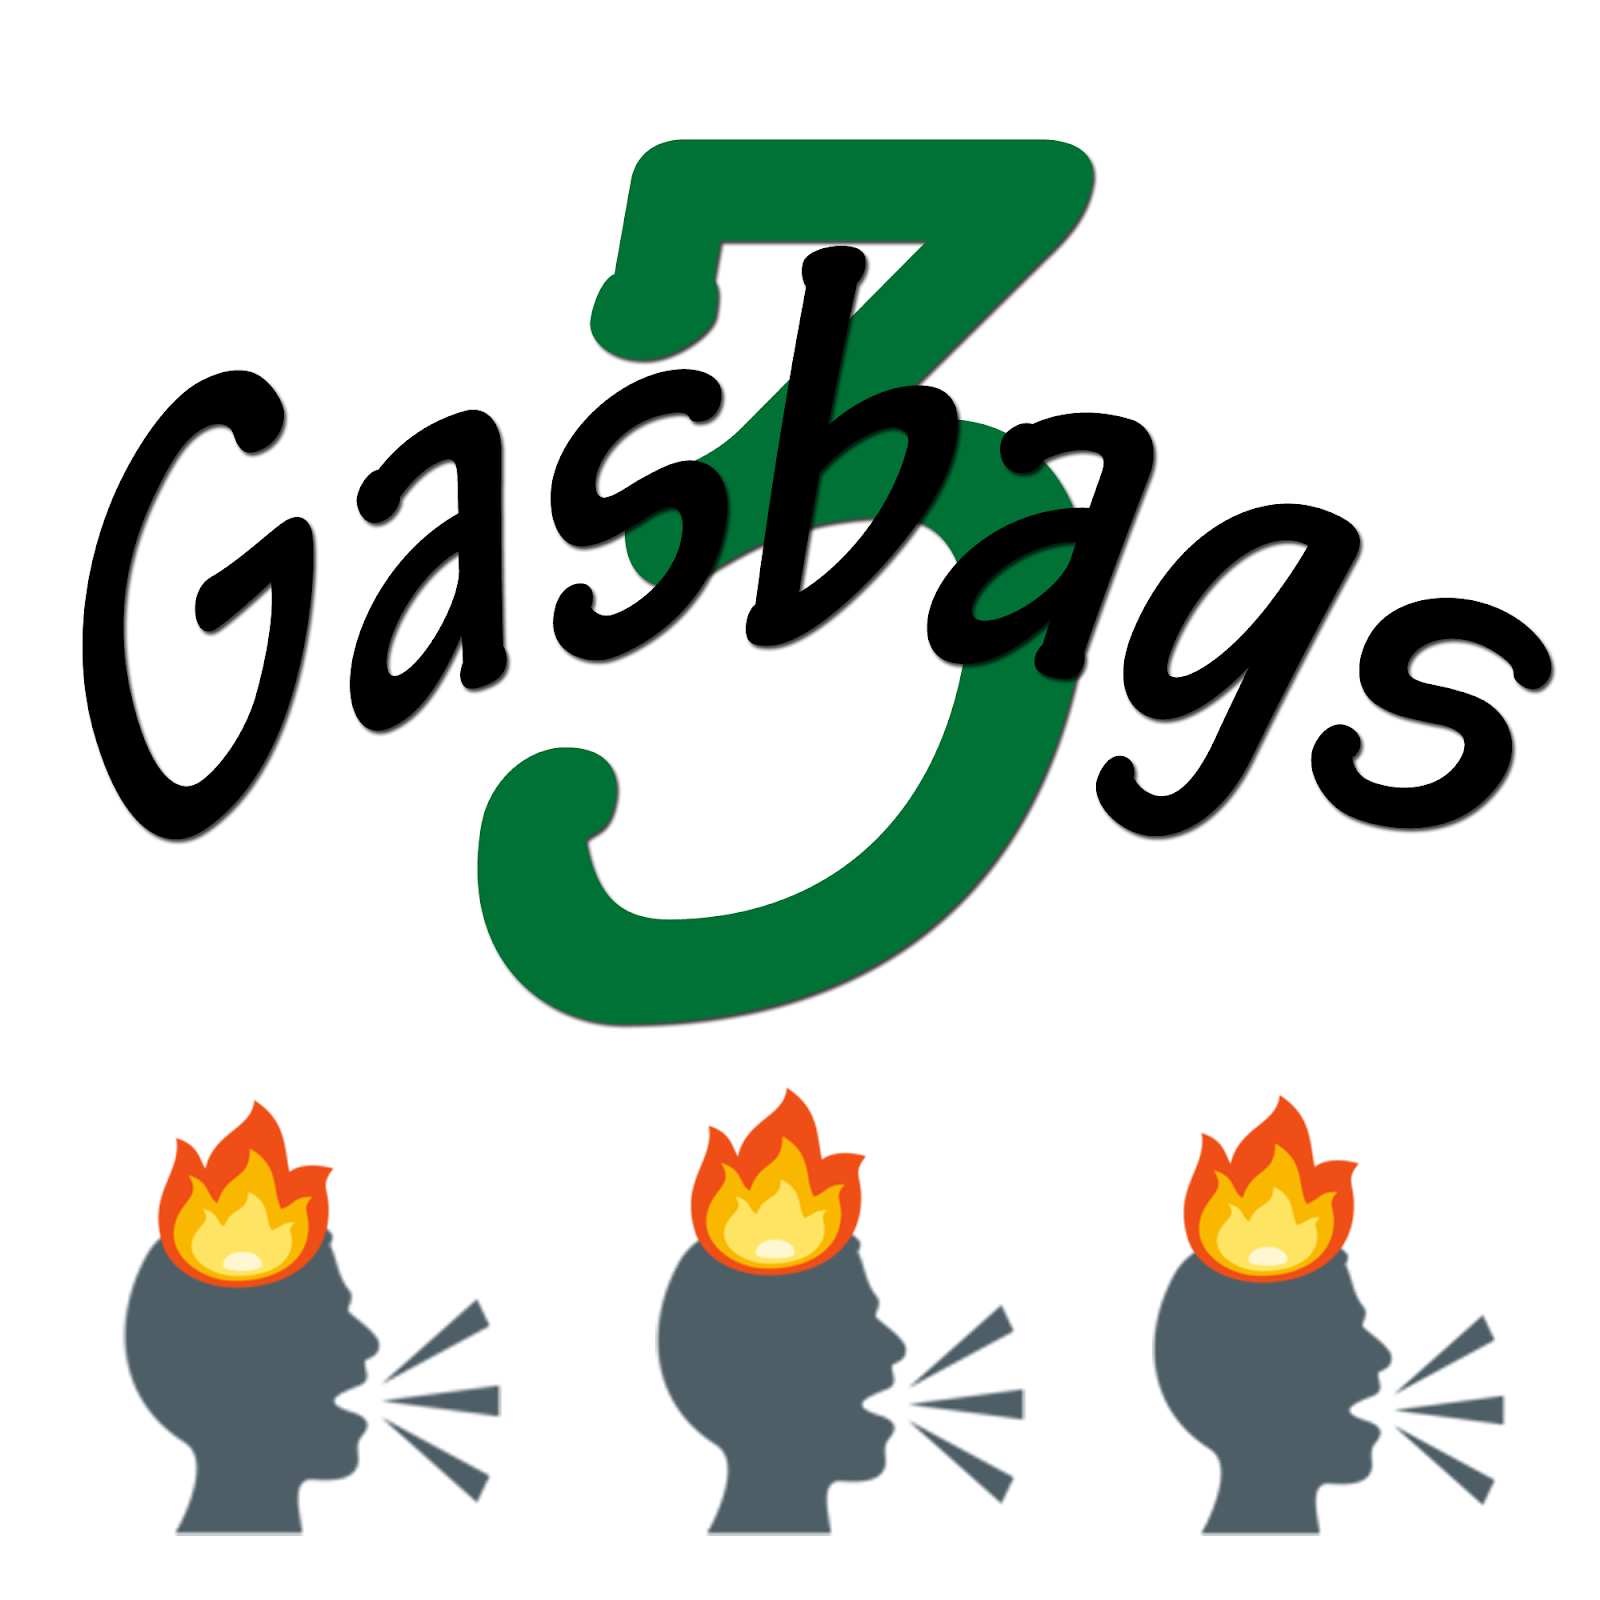 The Three Gasbags